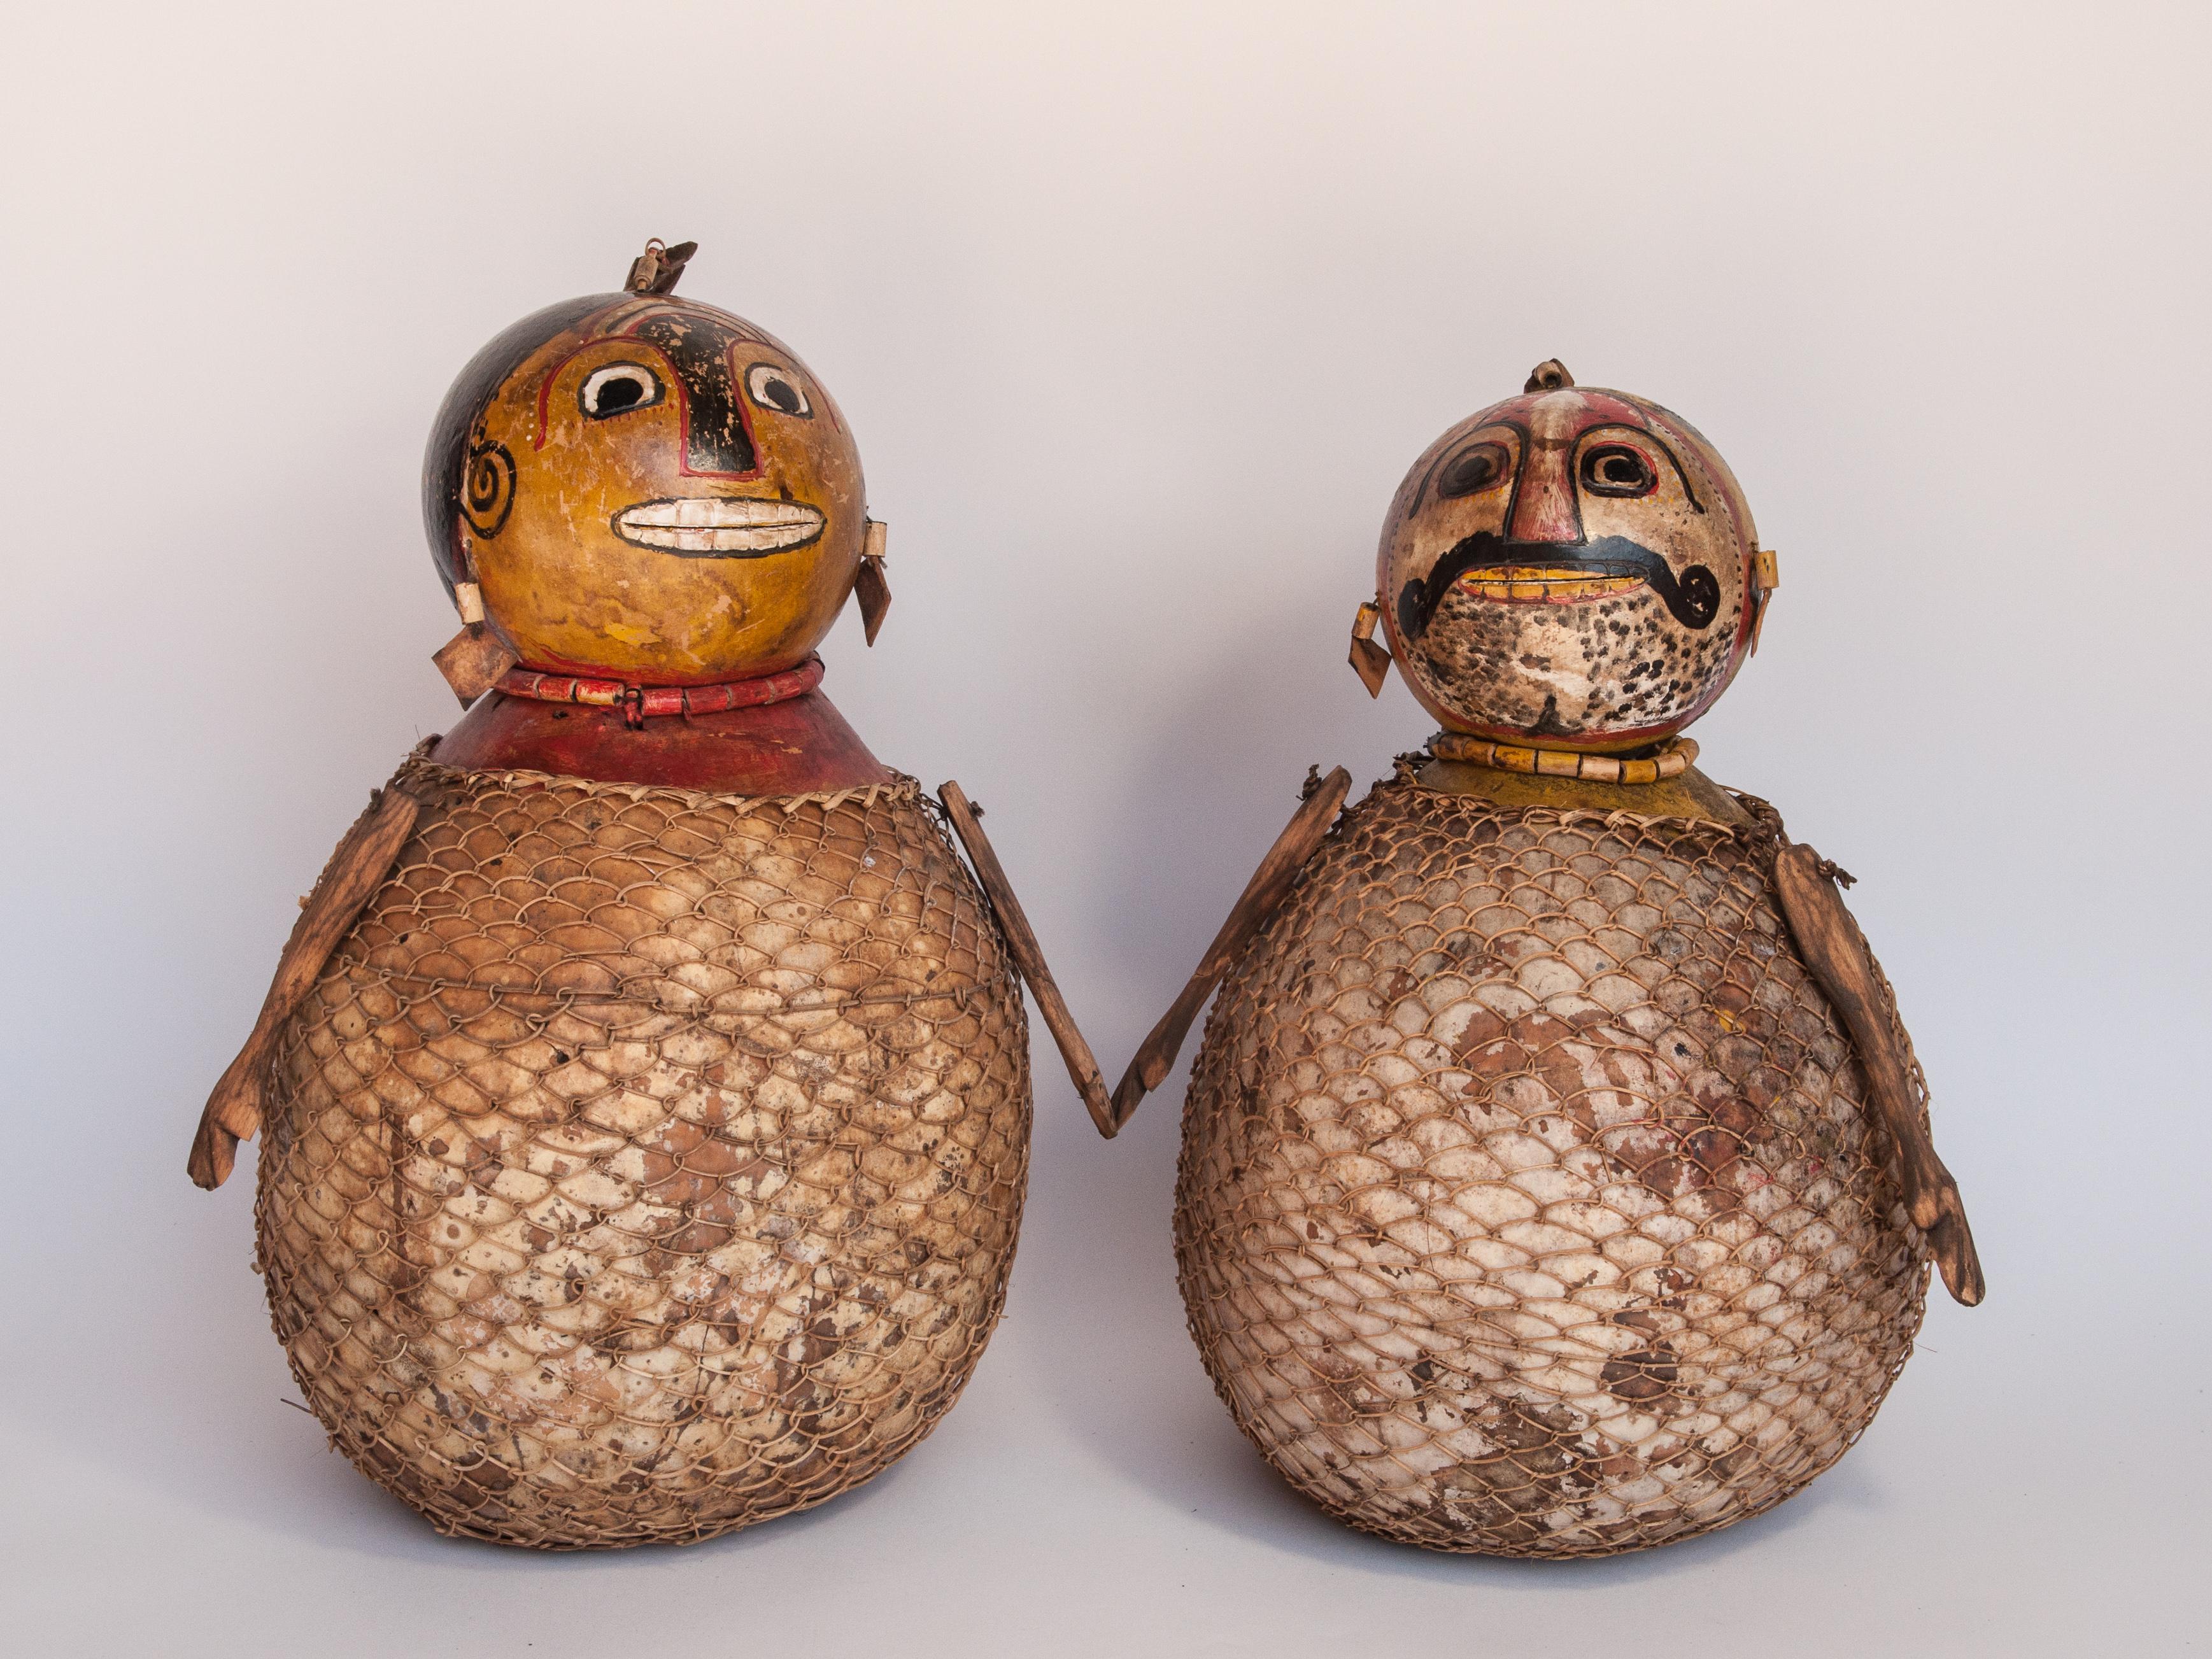 Indonesian Vintage Painted Gourd Couple, Folk Art from Lombok, Indonesia, Late 20th Century